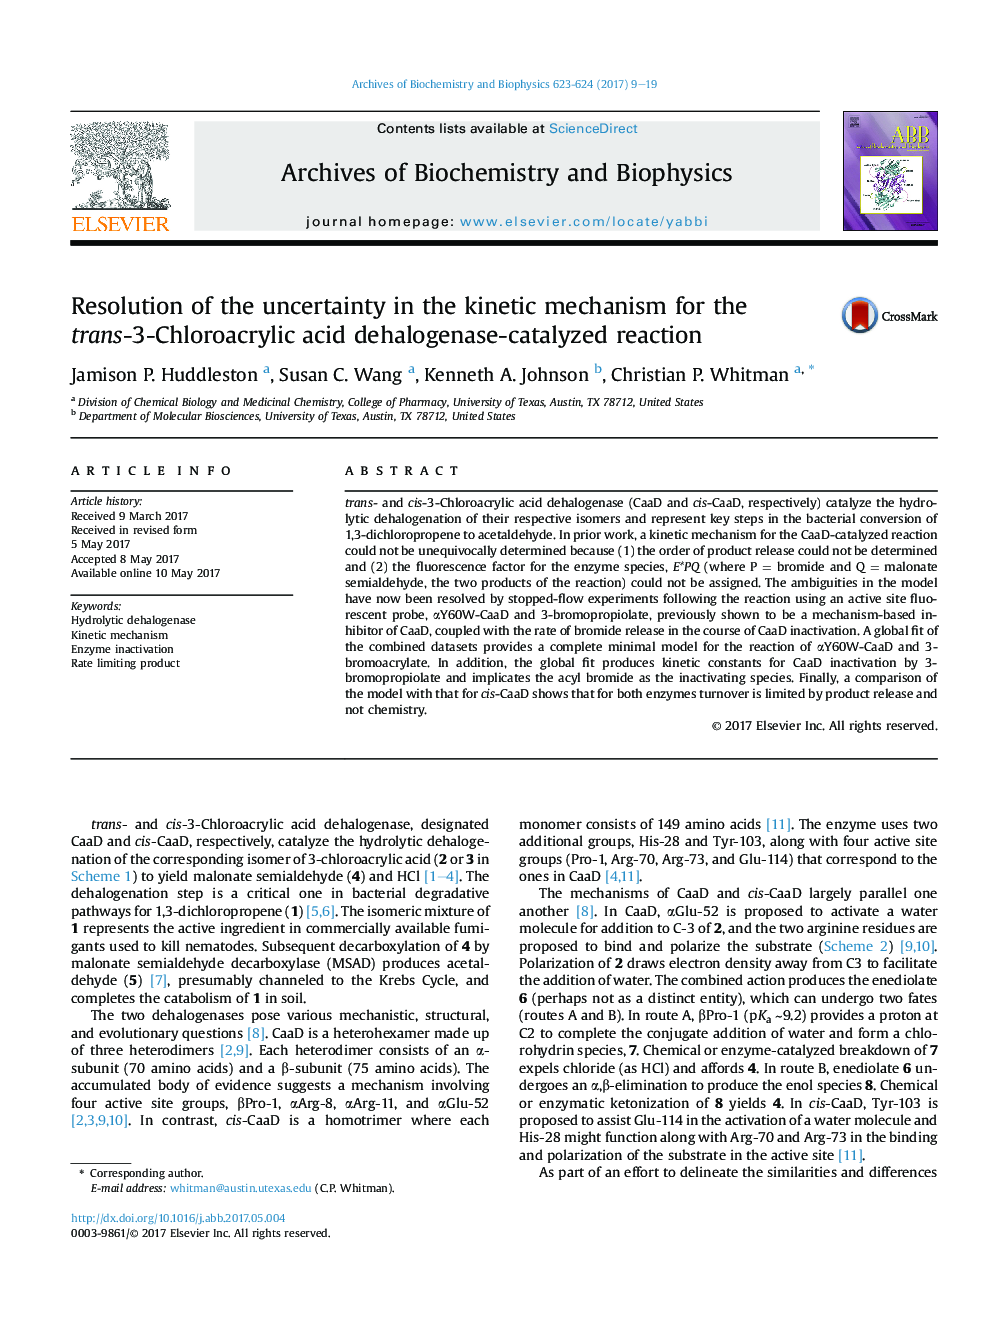 Resolution of the uncertainty in the kinetic mechanism for the trans-3-Chloroacrylic acid dehalogenase-catalyzed reaction